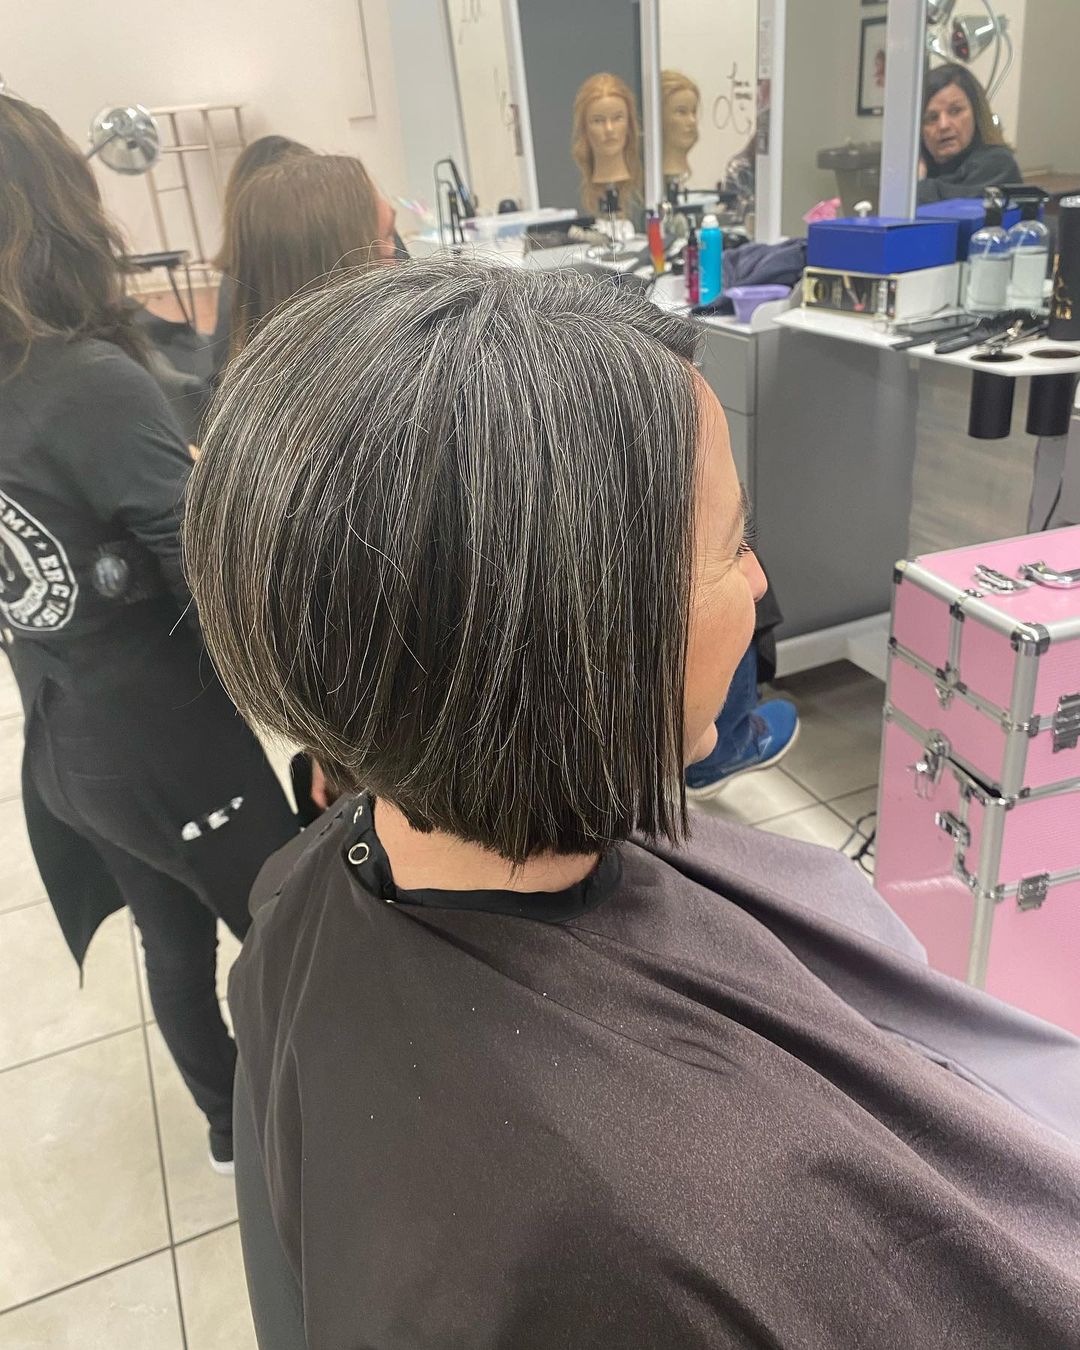 Stacked Bob 82 Long stacked bob | Medium length stacked bob | Pictures of stacked bob haircuts front and back Stacked Bob Hairstyles for Women